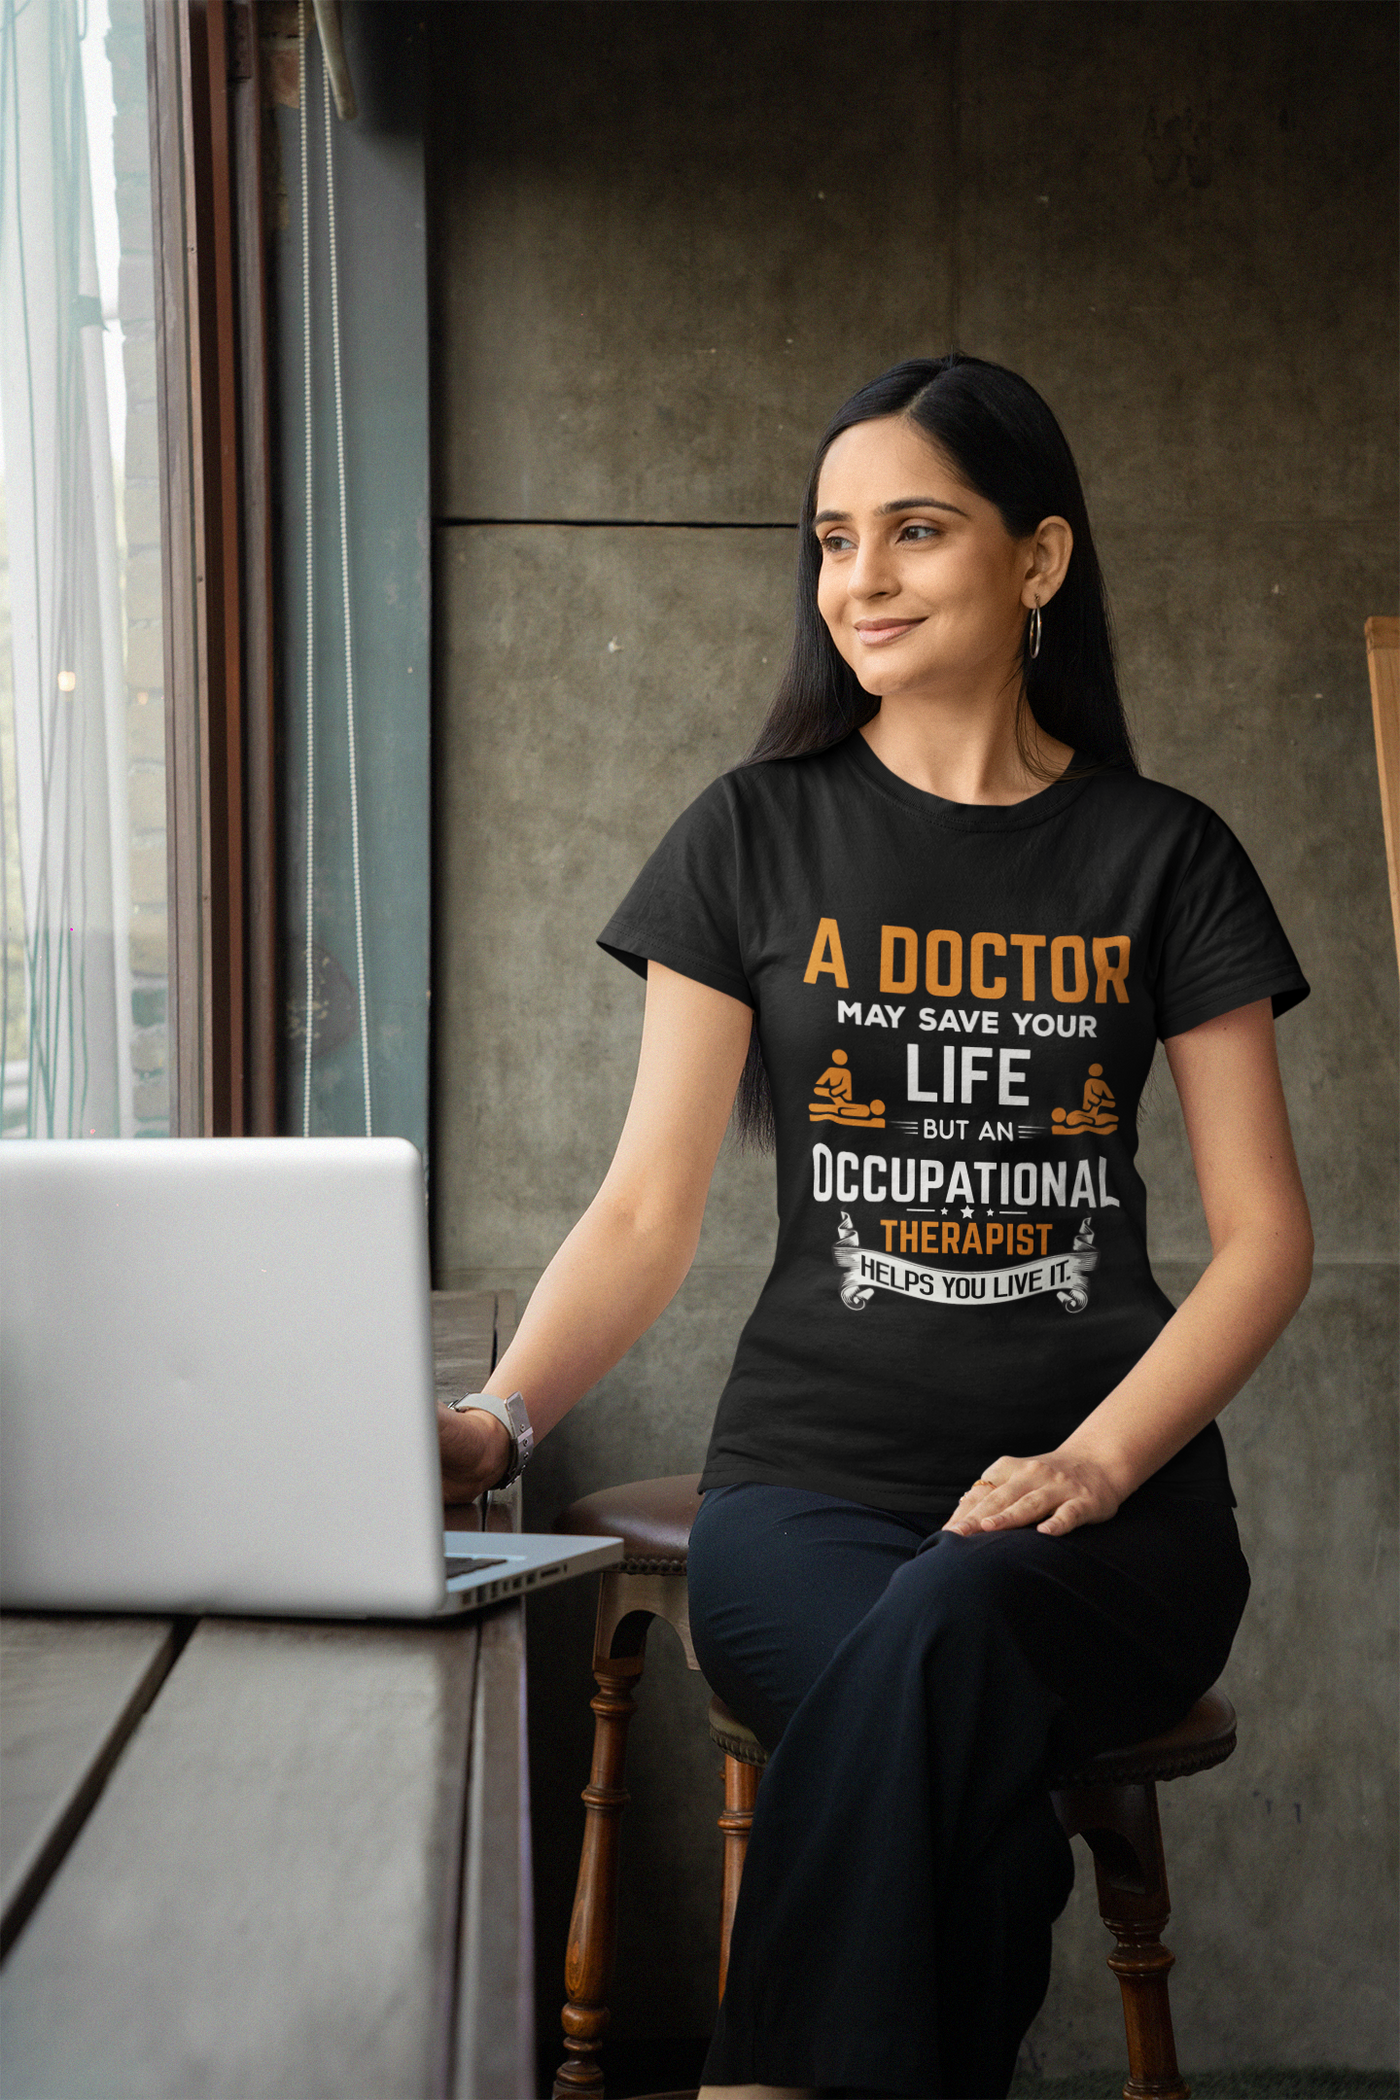 A Doctor May Save Your Life But An Occupational Therapist Helps You Live It